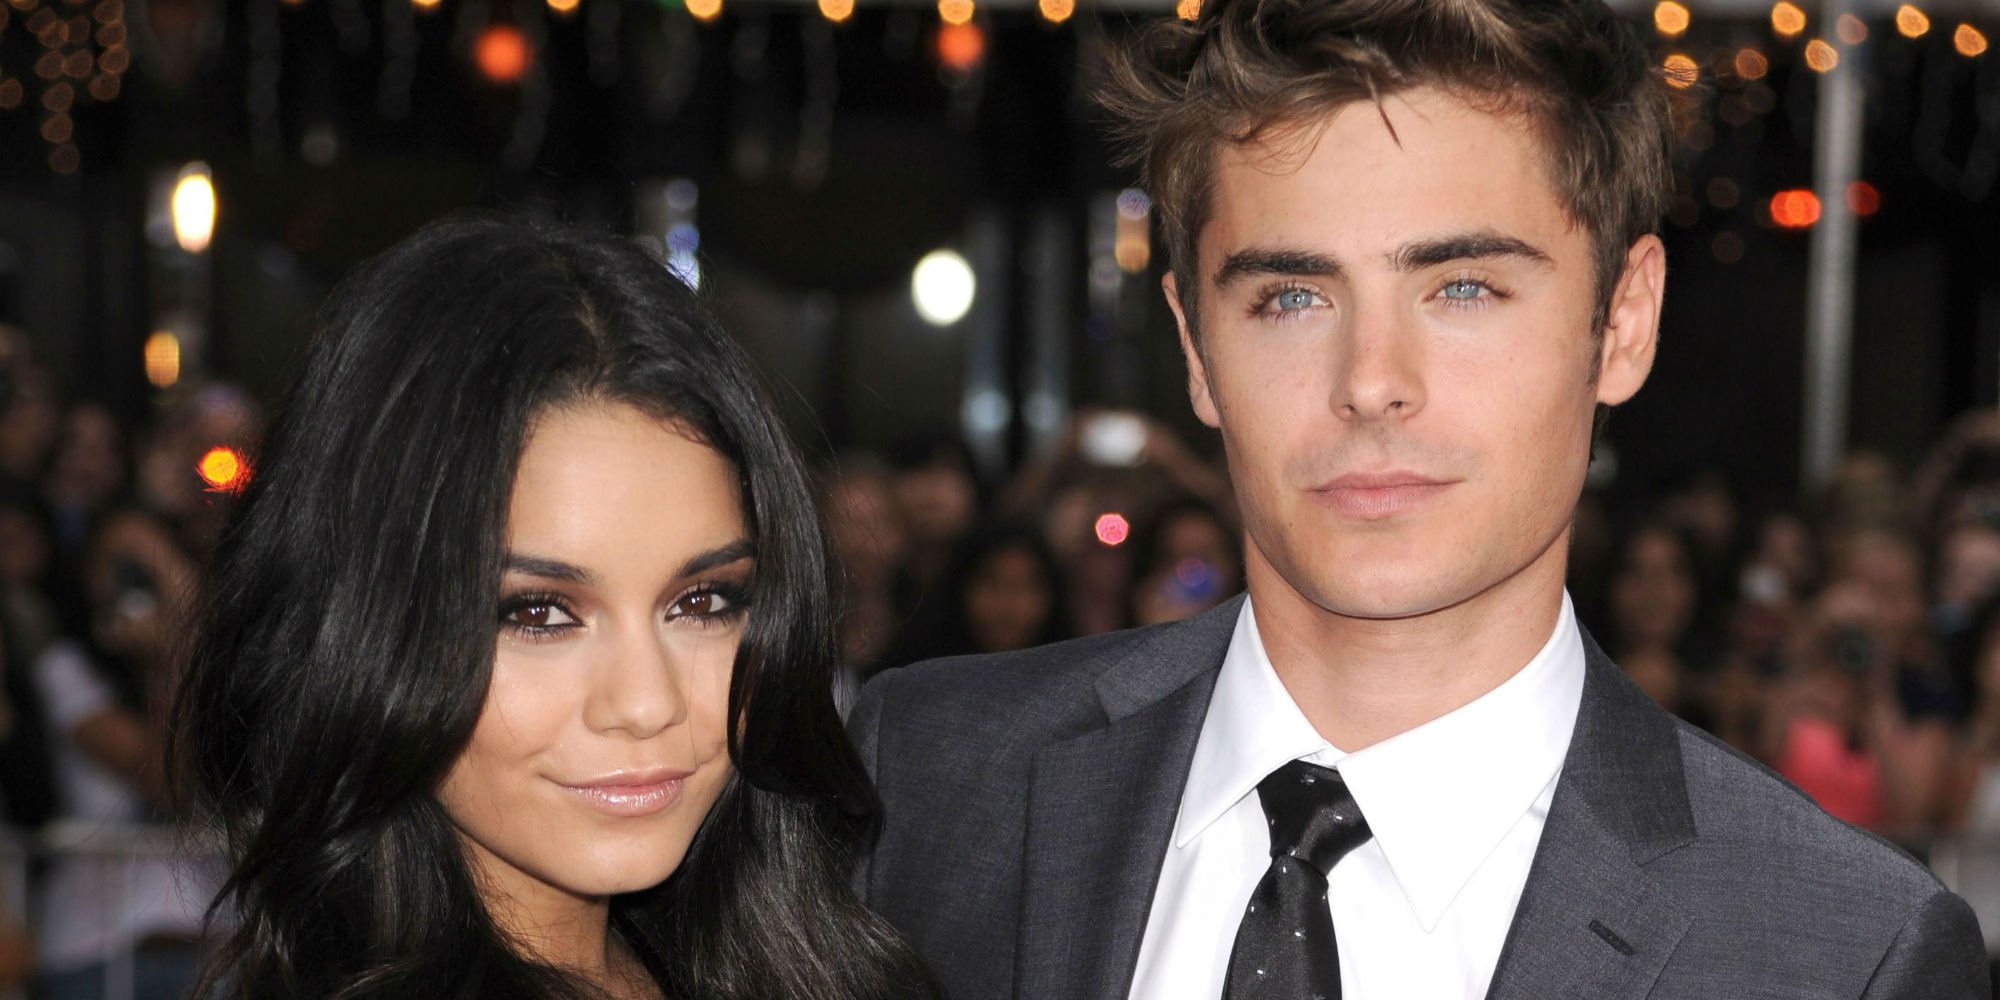 Vanessa Hudgens and Zac Efron pose for picture